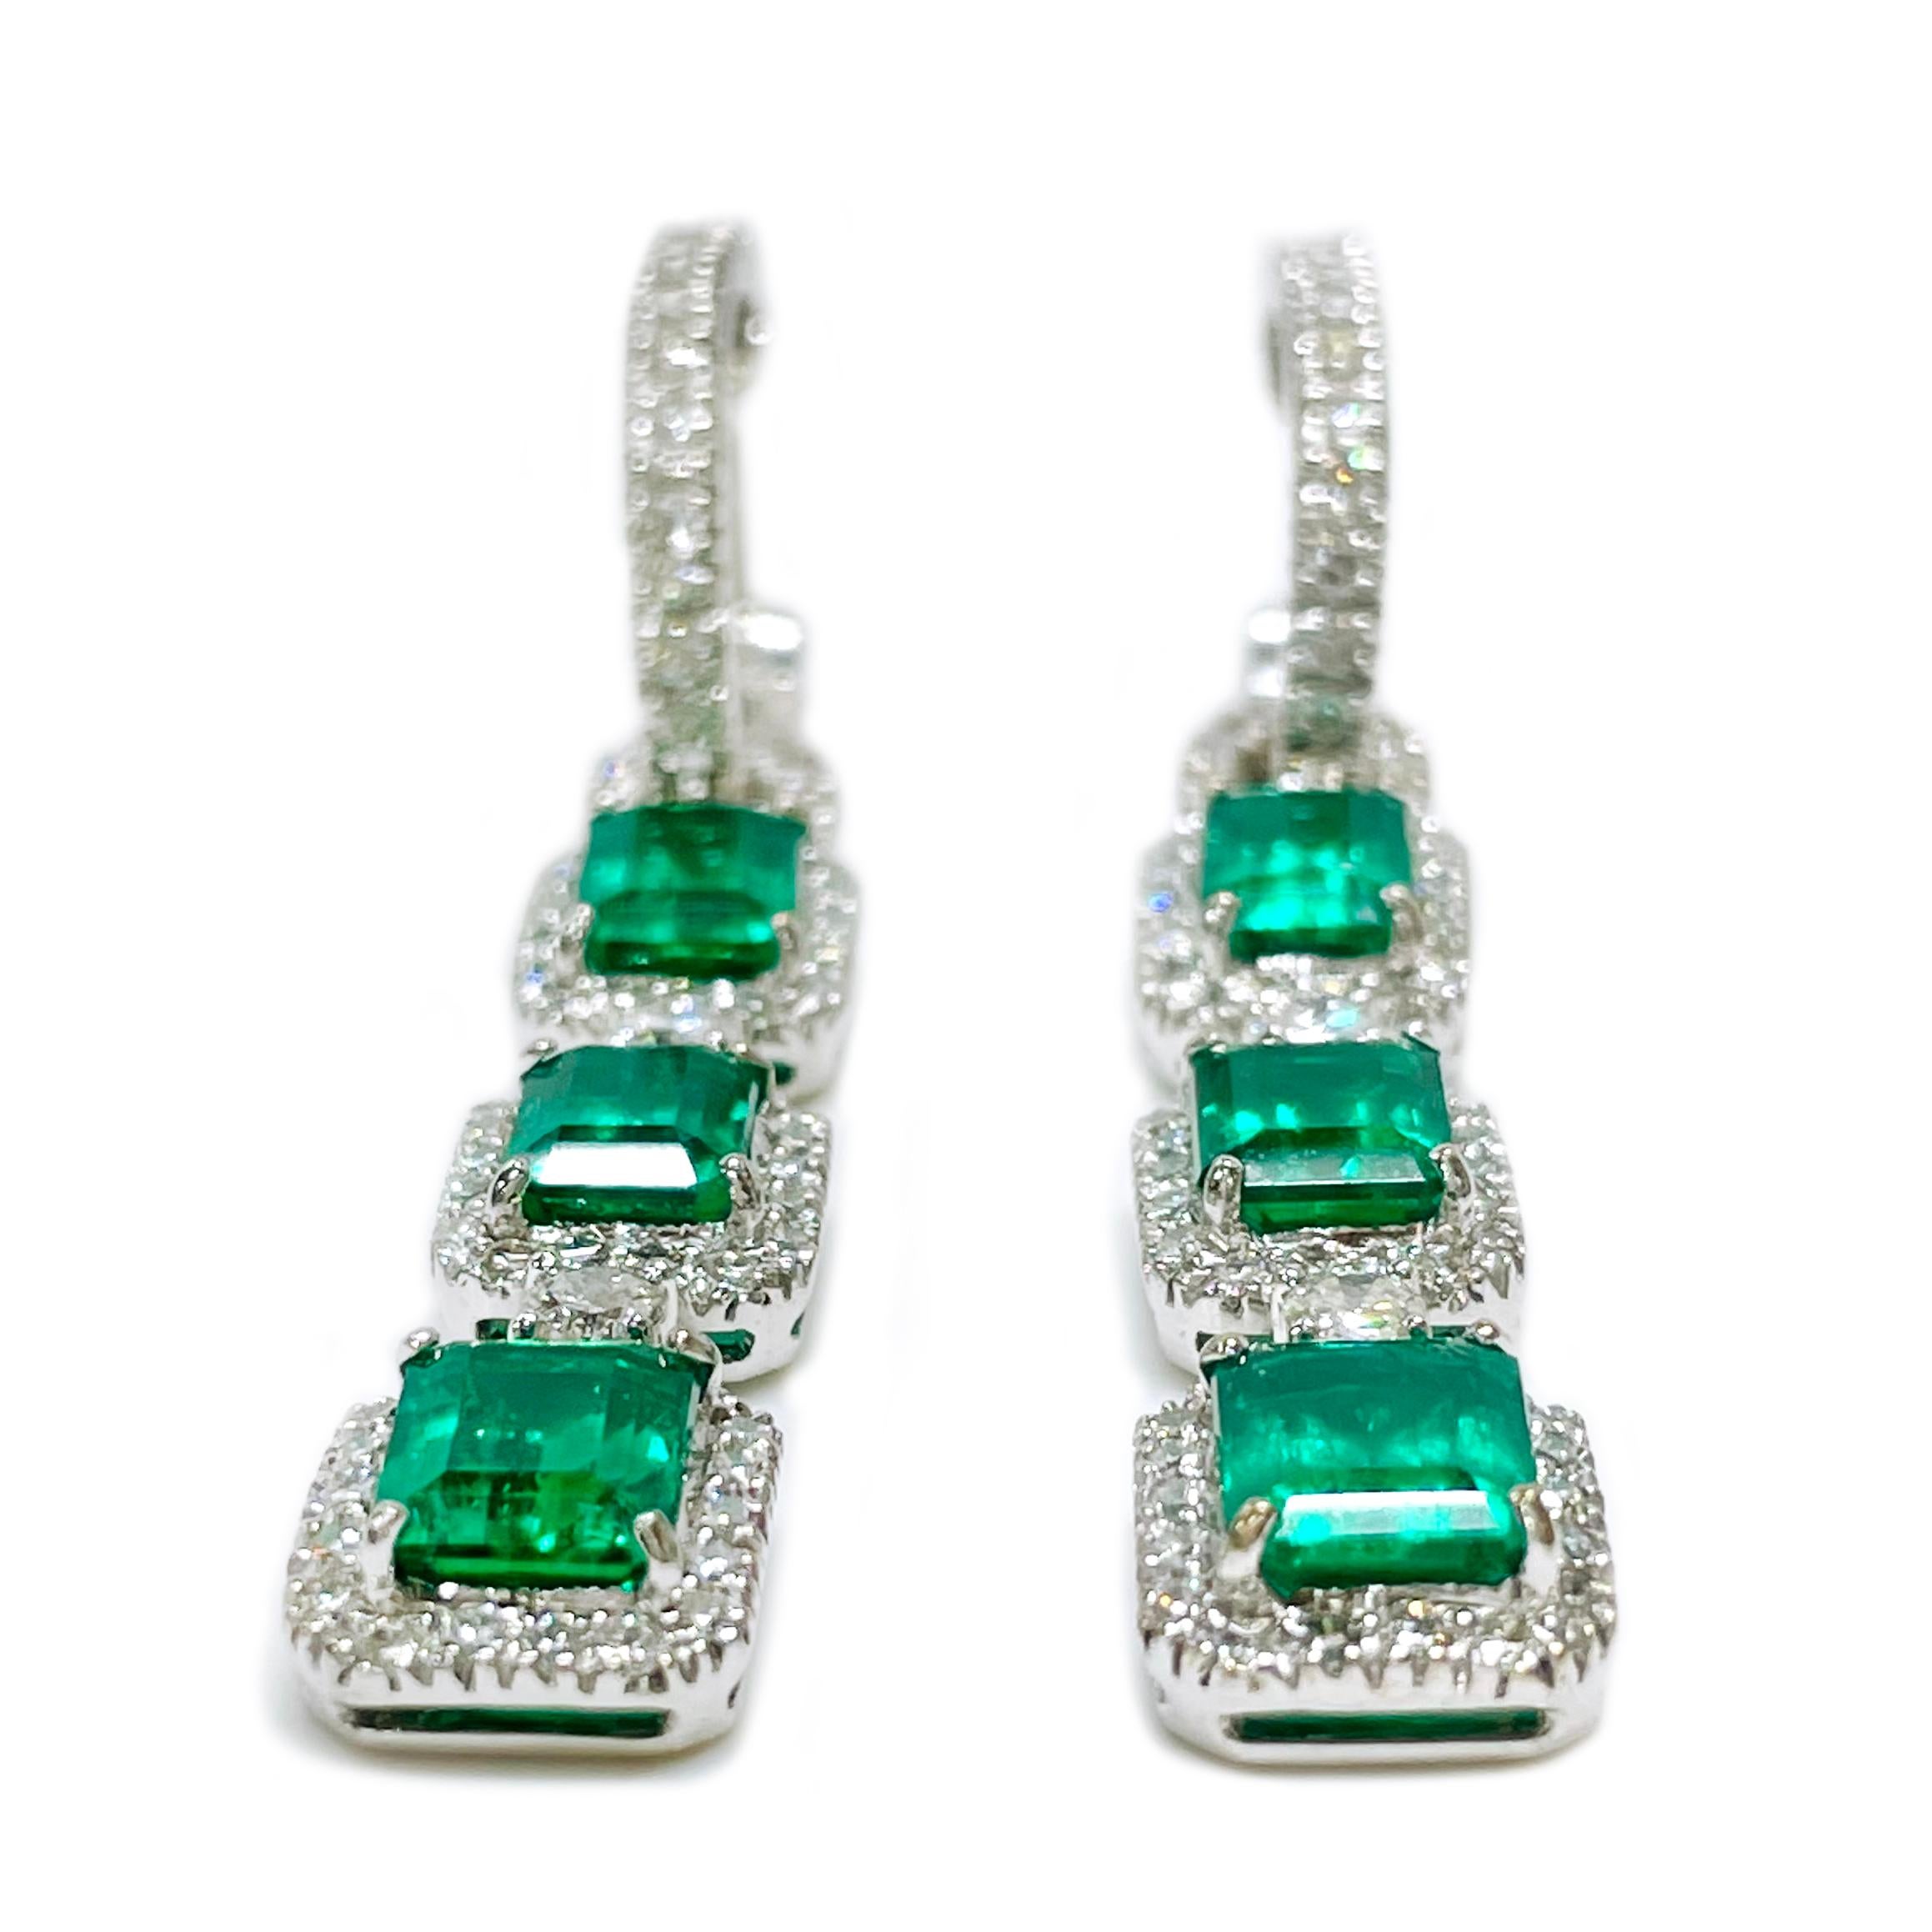 Each lever-back earring measures 55mm in height x 8.2mm in width and 4.8mm in depth.

One pair of electronically tested 18KT white gold ladies cast & assembled emerald and diamond dangle earrings. Condition is good.

Each two inch length earring